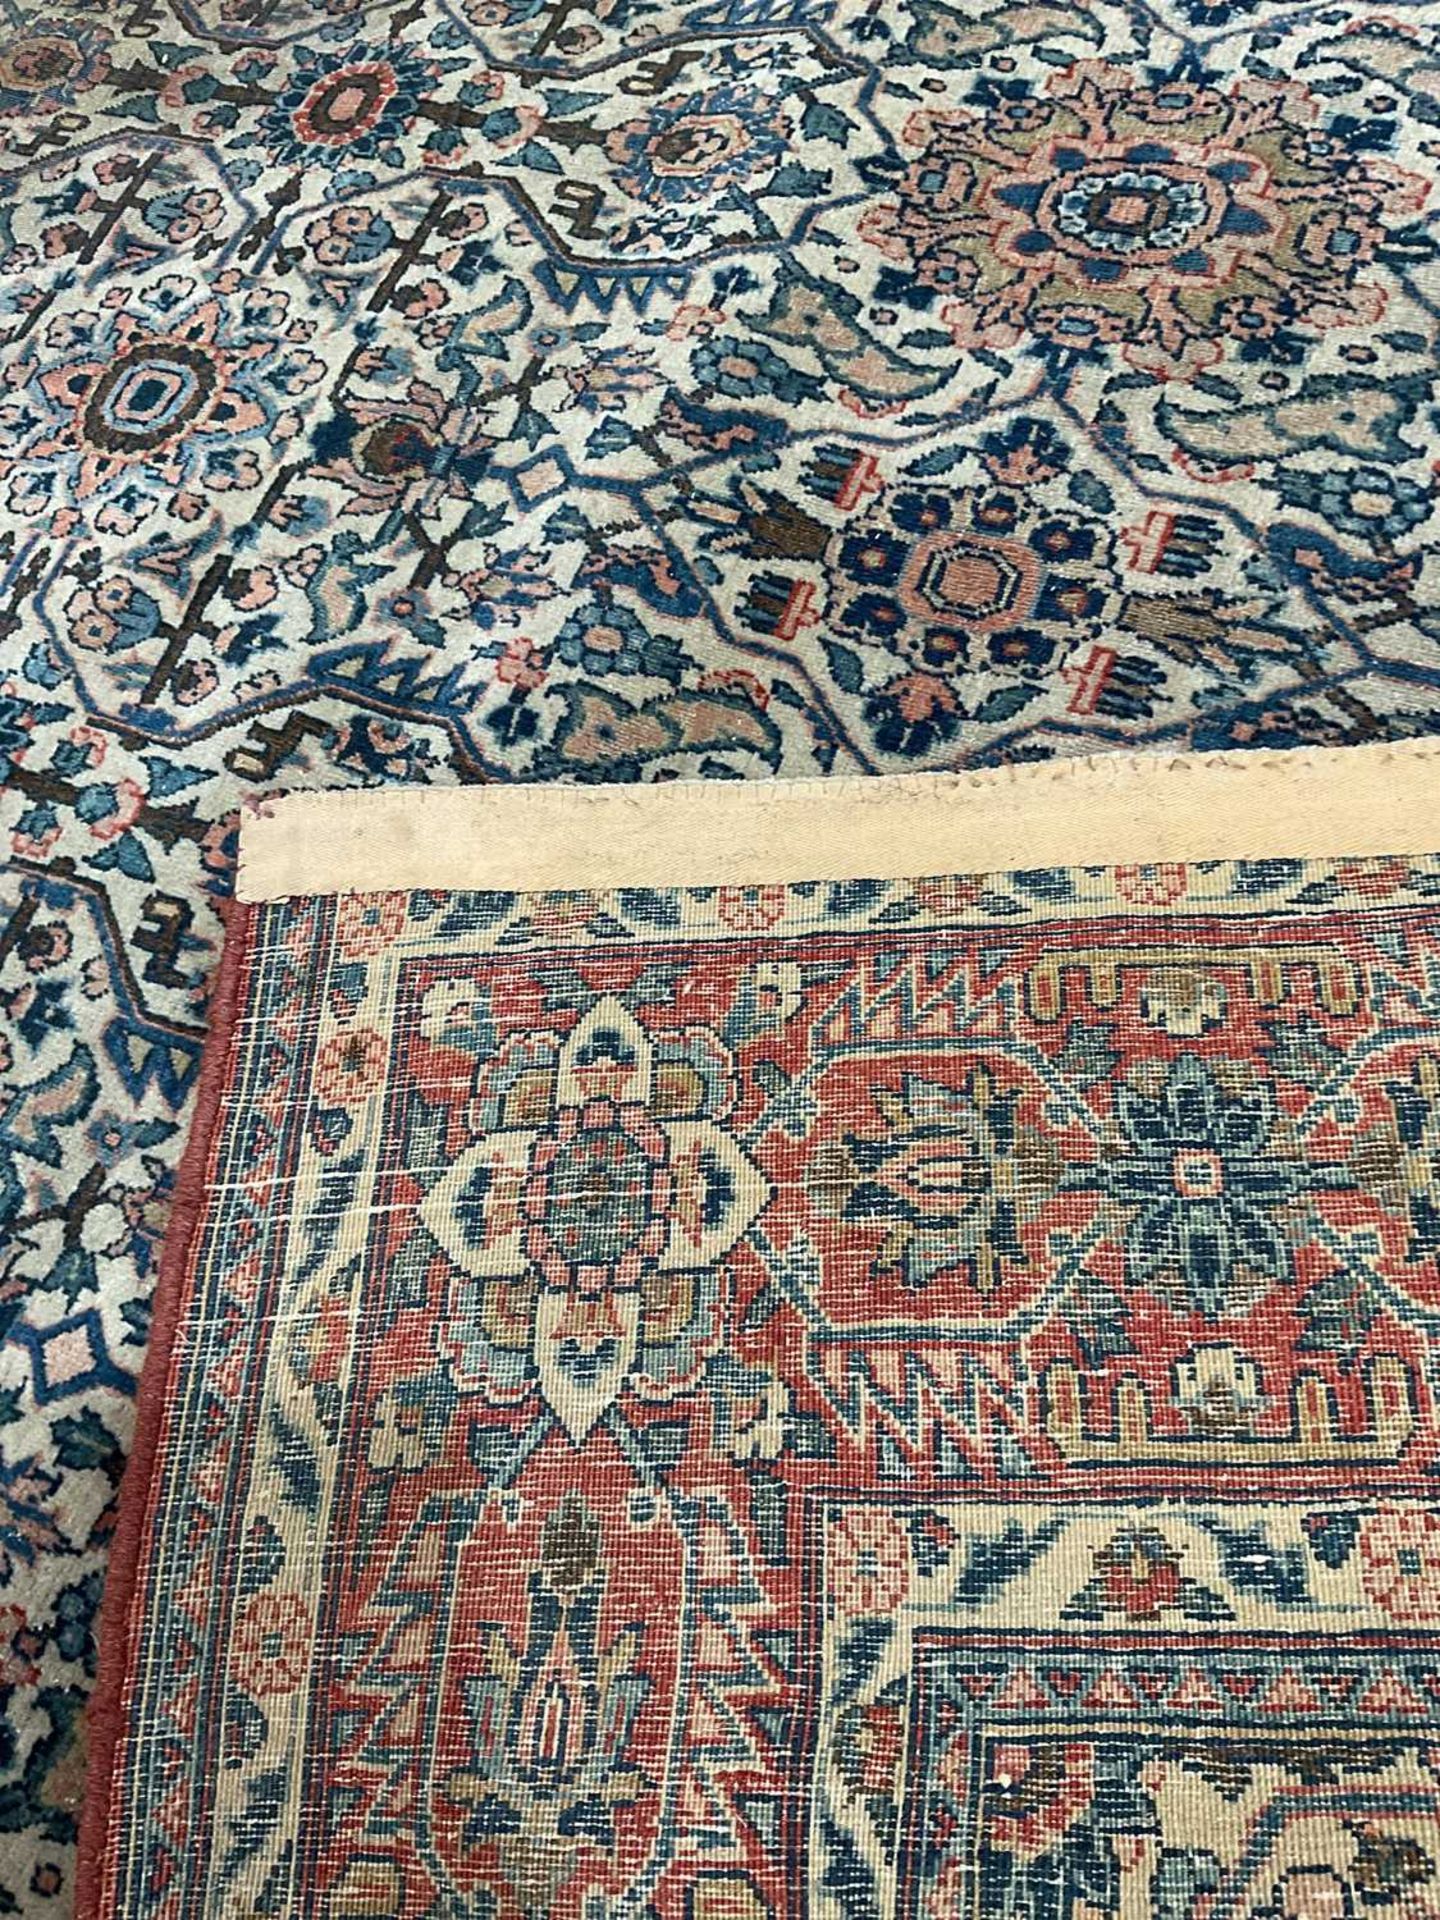 An antique ivory ground Kerman rug with an allover floral design within multiple borders 202 x 137cm - Image 9 of 10